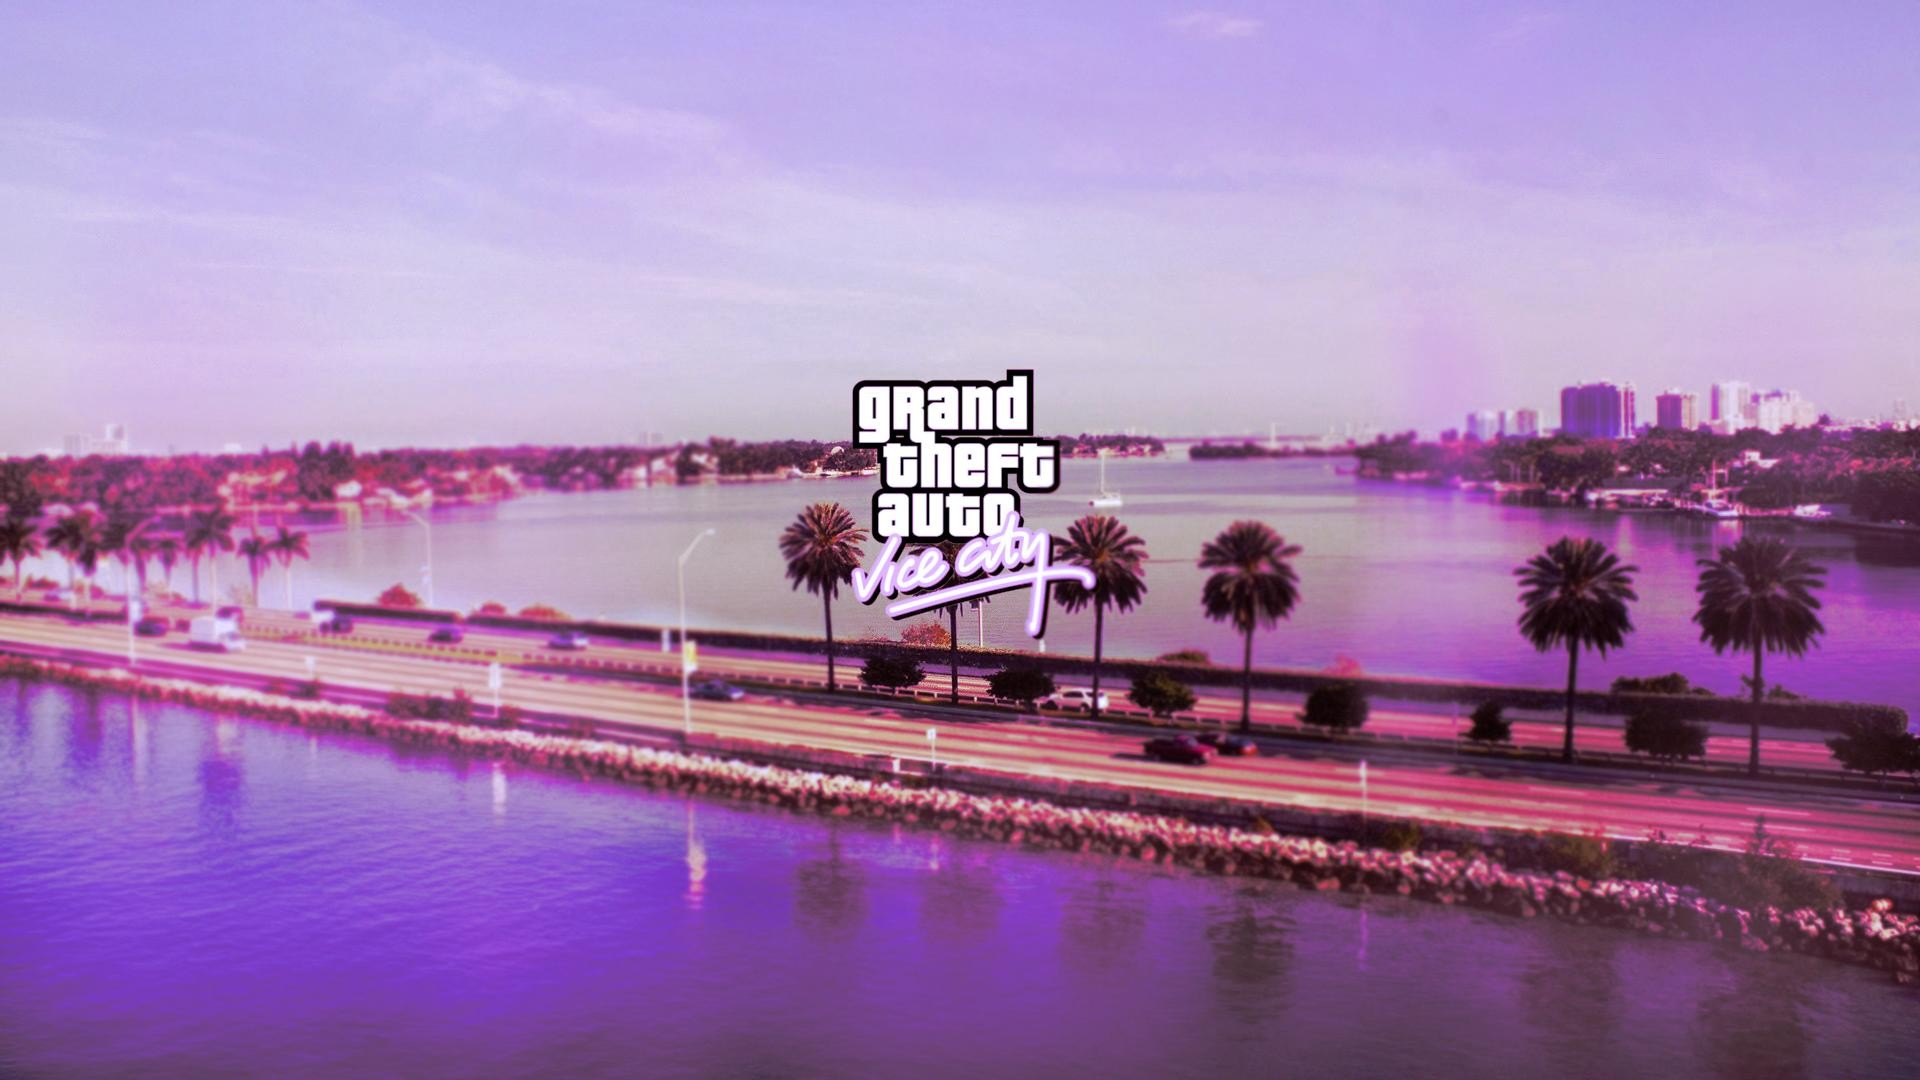 Grand Theft Auto Vice City Road Pink Logo Sea Lake Pc Gaming Wallpapers Hd Desktop And Mobile Backgrounds Best music mix ♫ no copyright edm ♫ gaming music trap, house, dubstep. grand theft auto vice city road pink